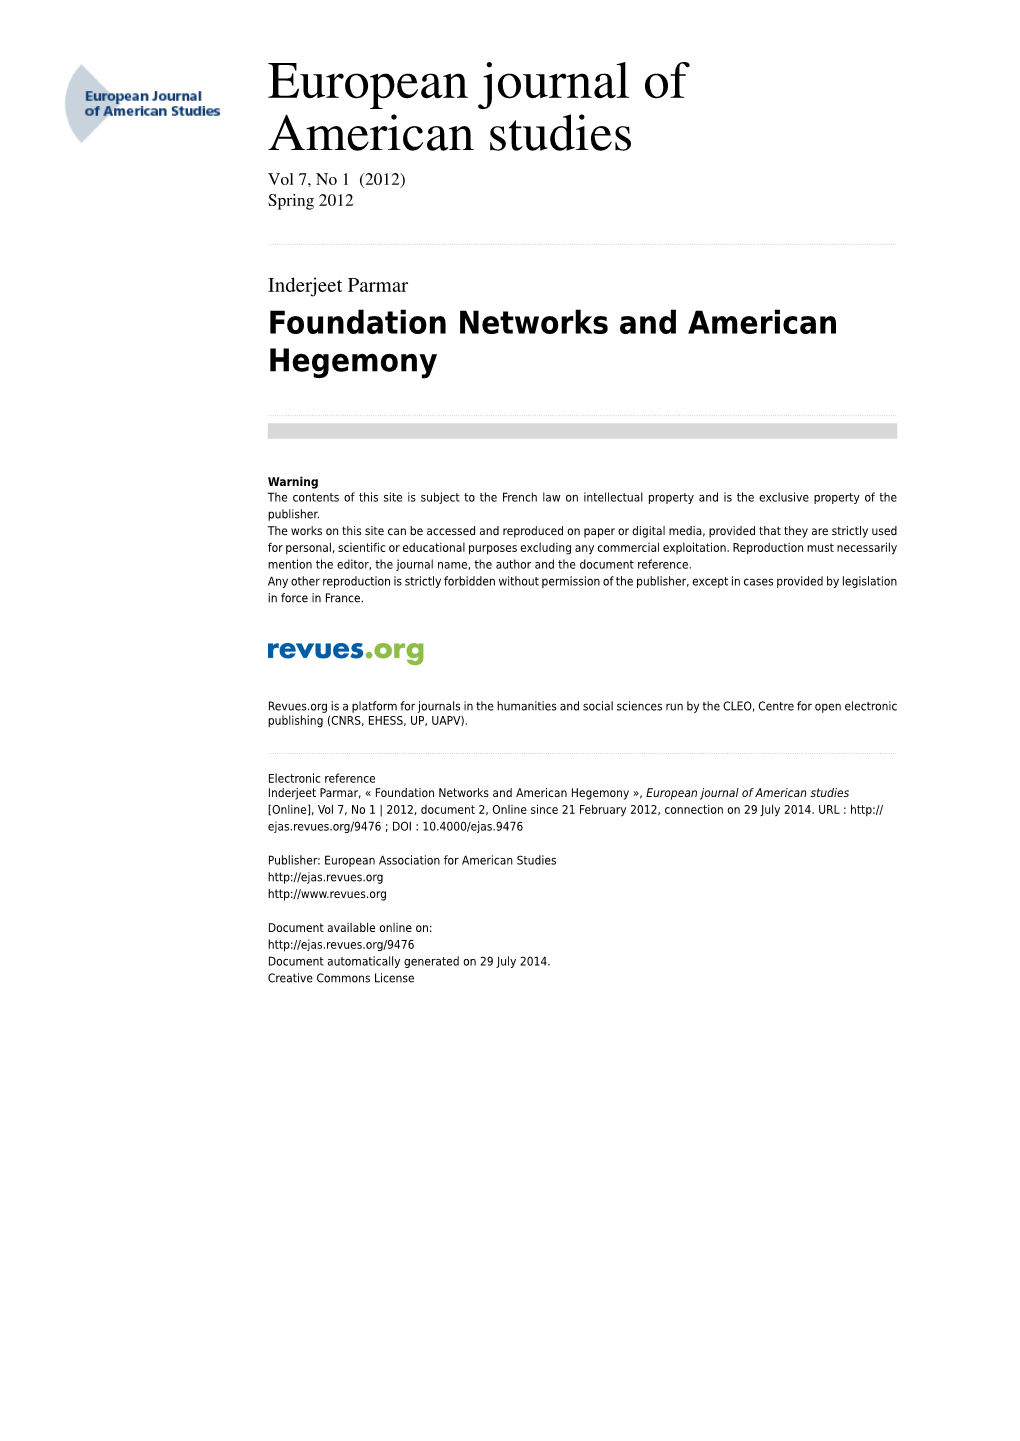 Foundation Networks and American Hegemony